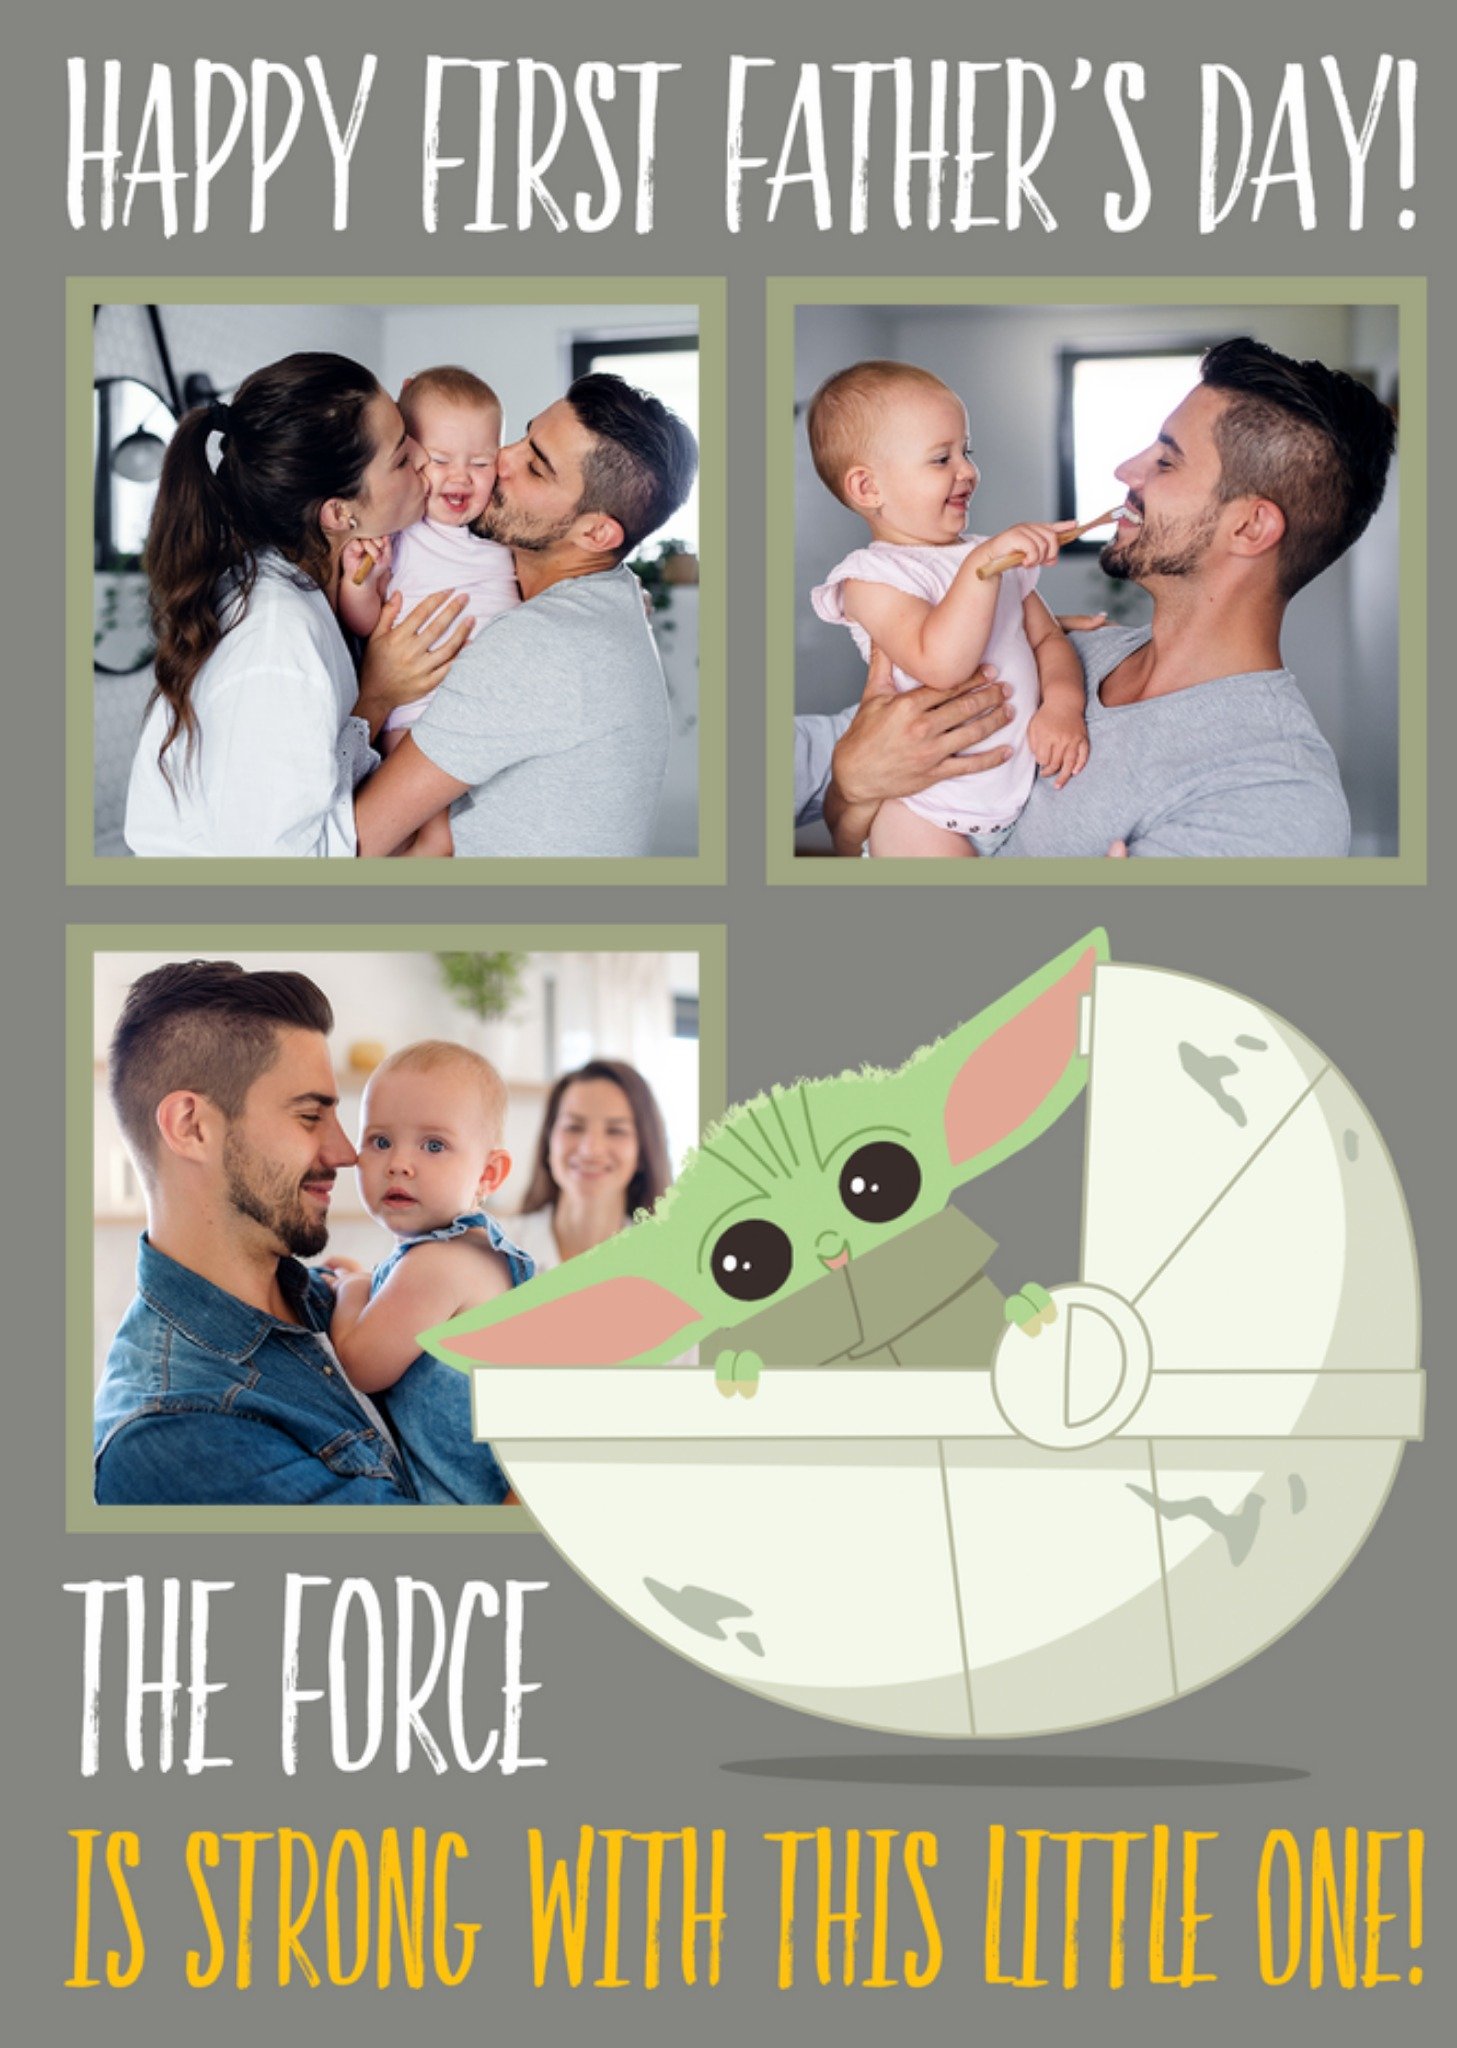 Disney Star Wars The Mandalorian Happy Fathers Day The Force Is Strong Photo Upload Card, Large